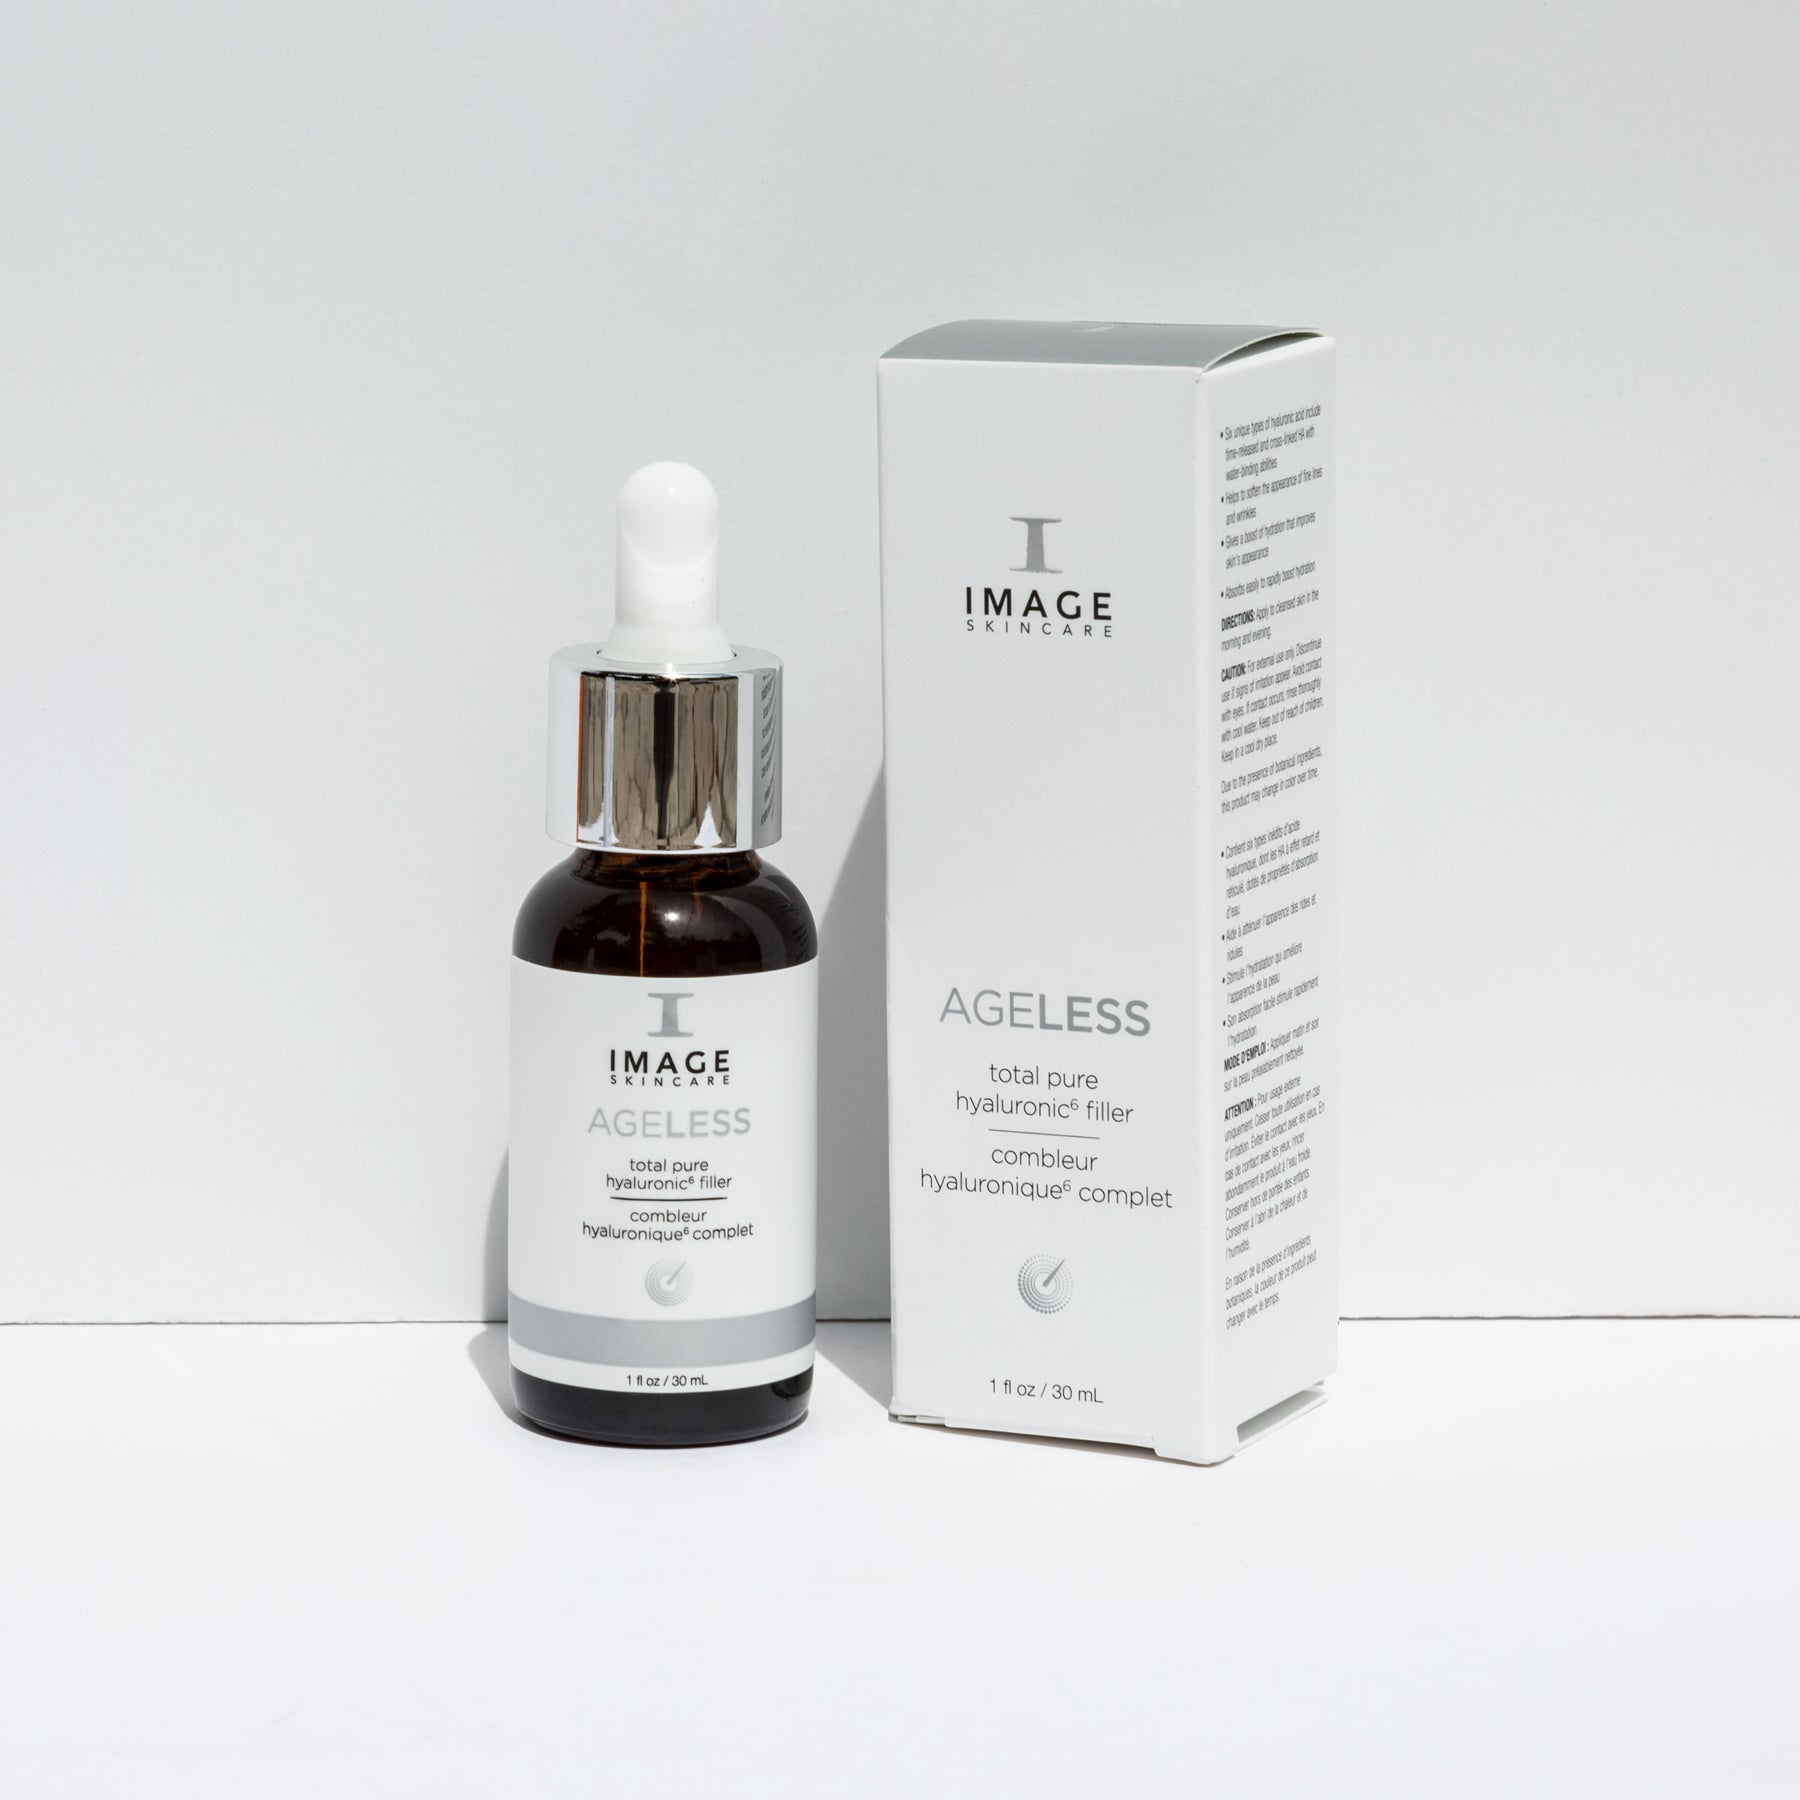 RETAIL - AGELESS total pure hyaluronic6 filler - 30ml - A-209